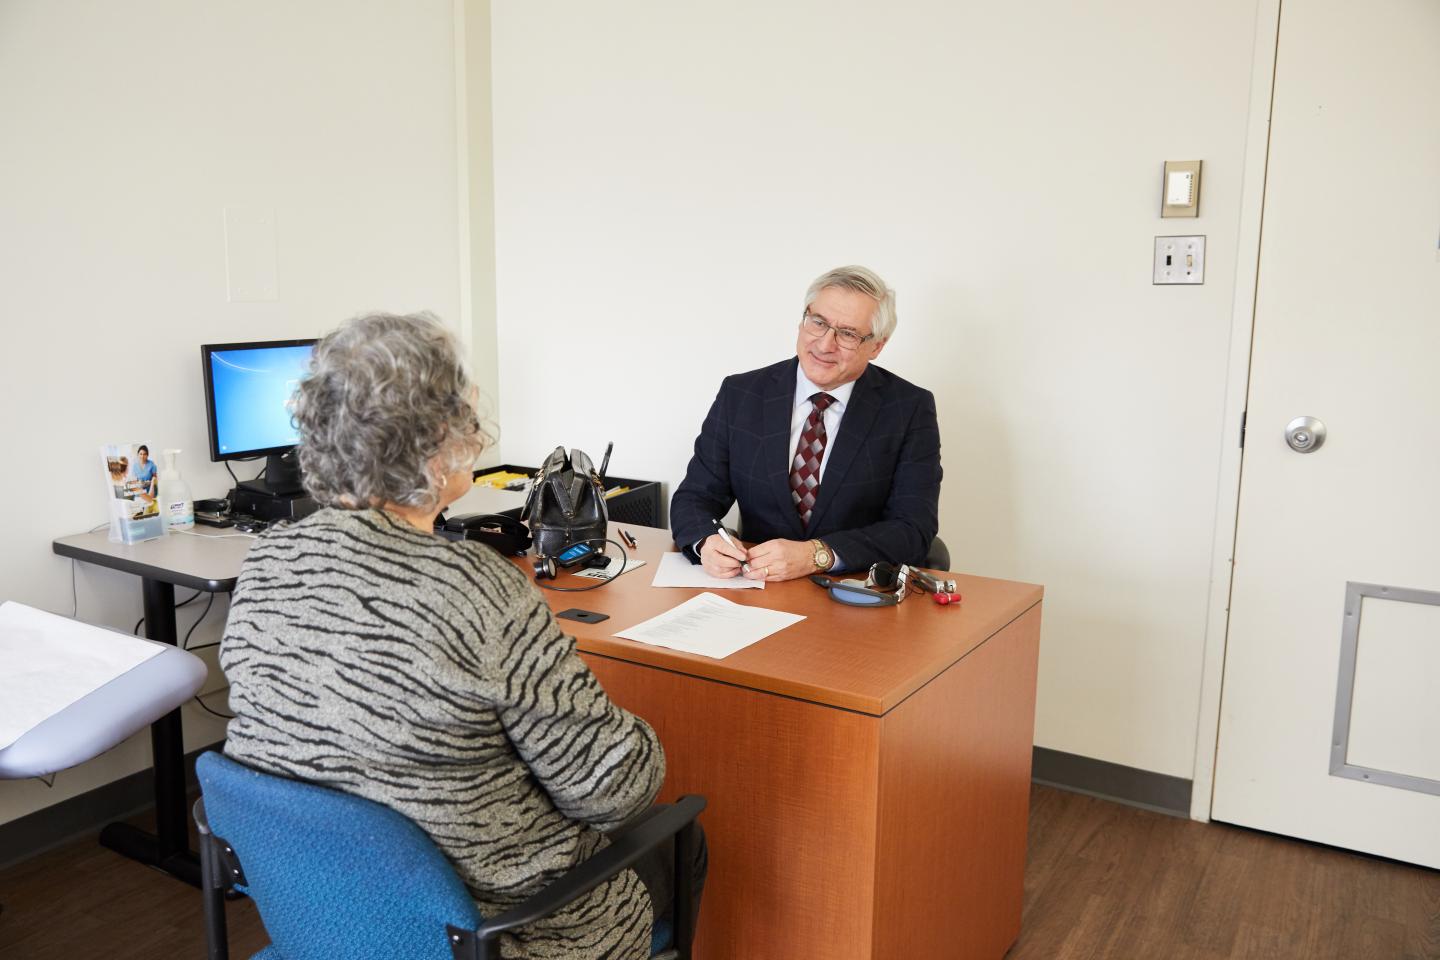 Dr. Howard Chertkow Talking with a Client